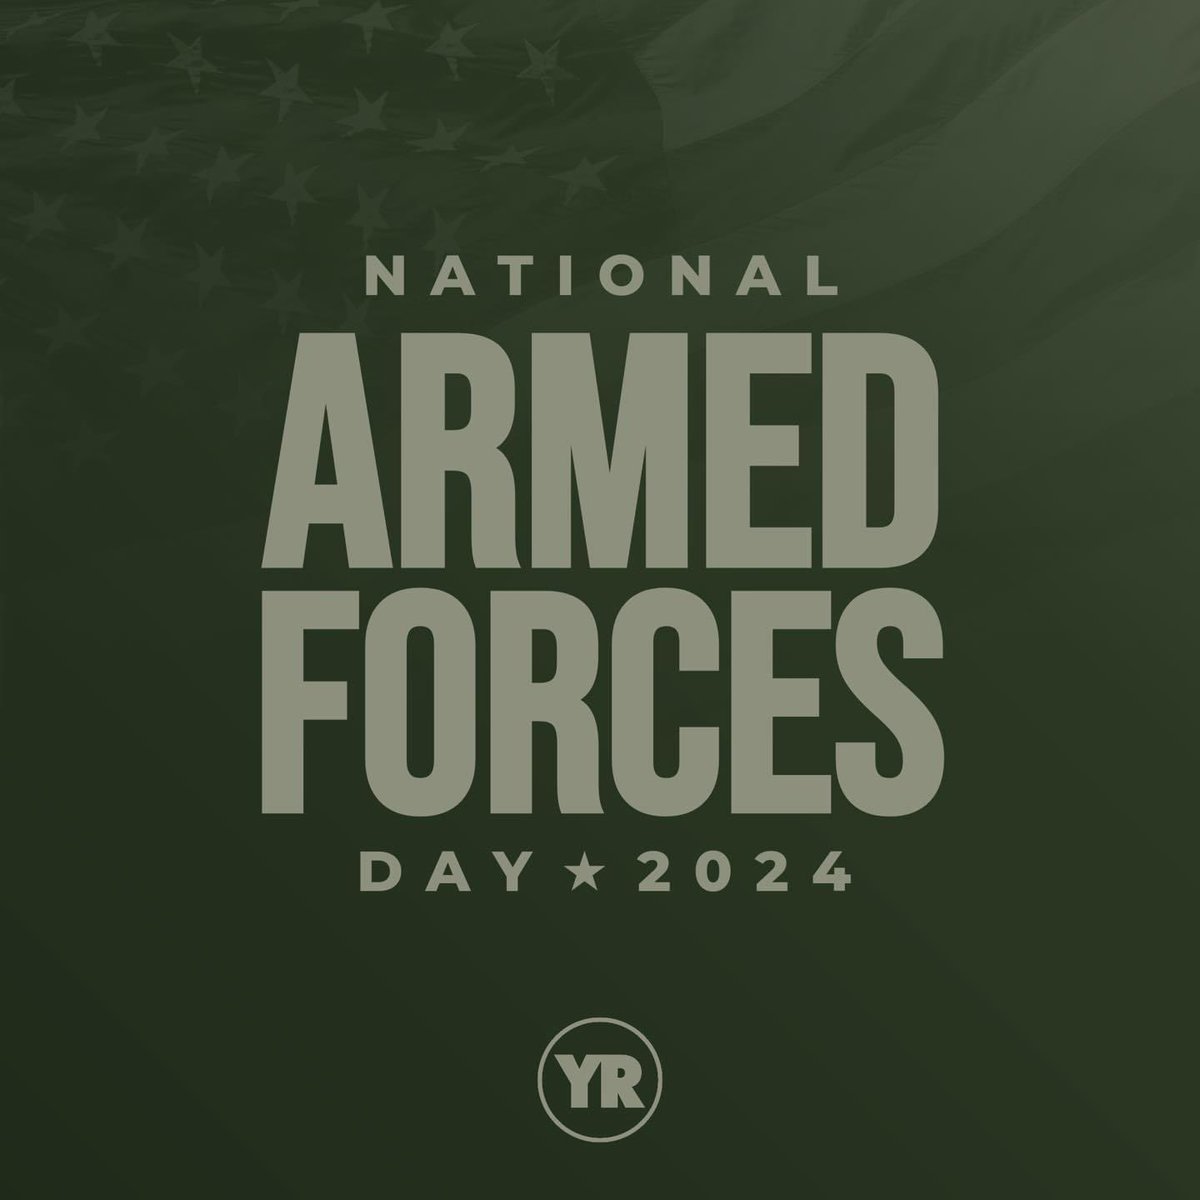 Honoring the brave men and women who serve our country with courage and dedication. Happy Armed Forces Day! 🇺🇸 Thank you for your service and sacrifice.